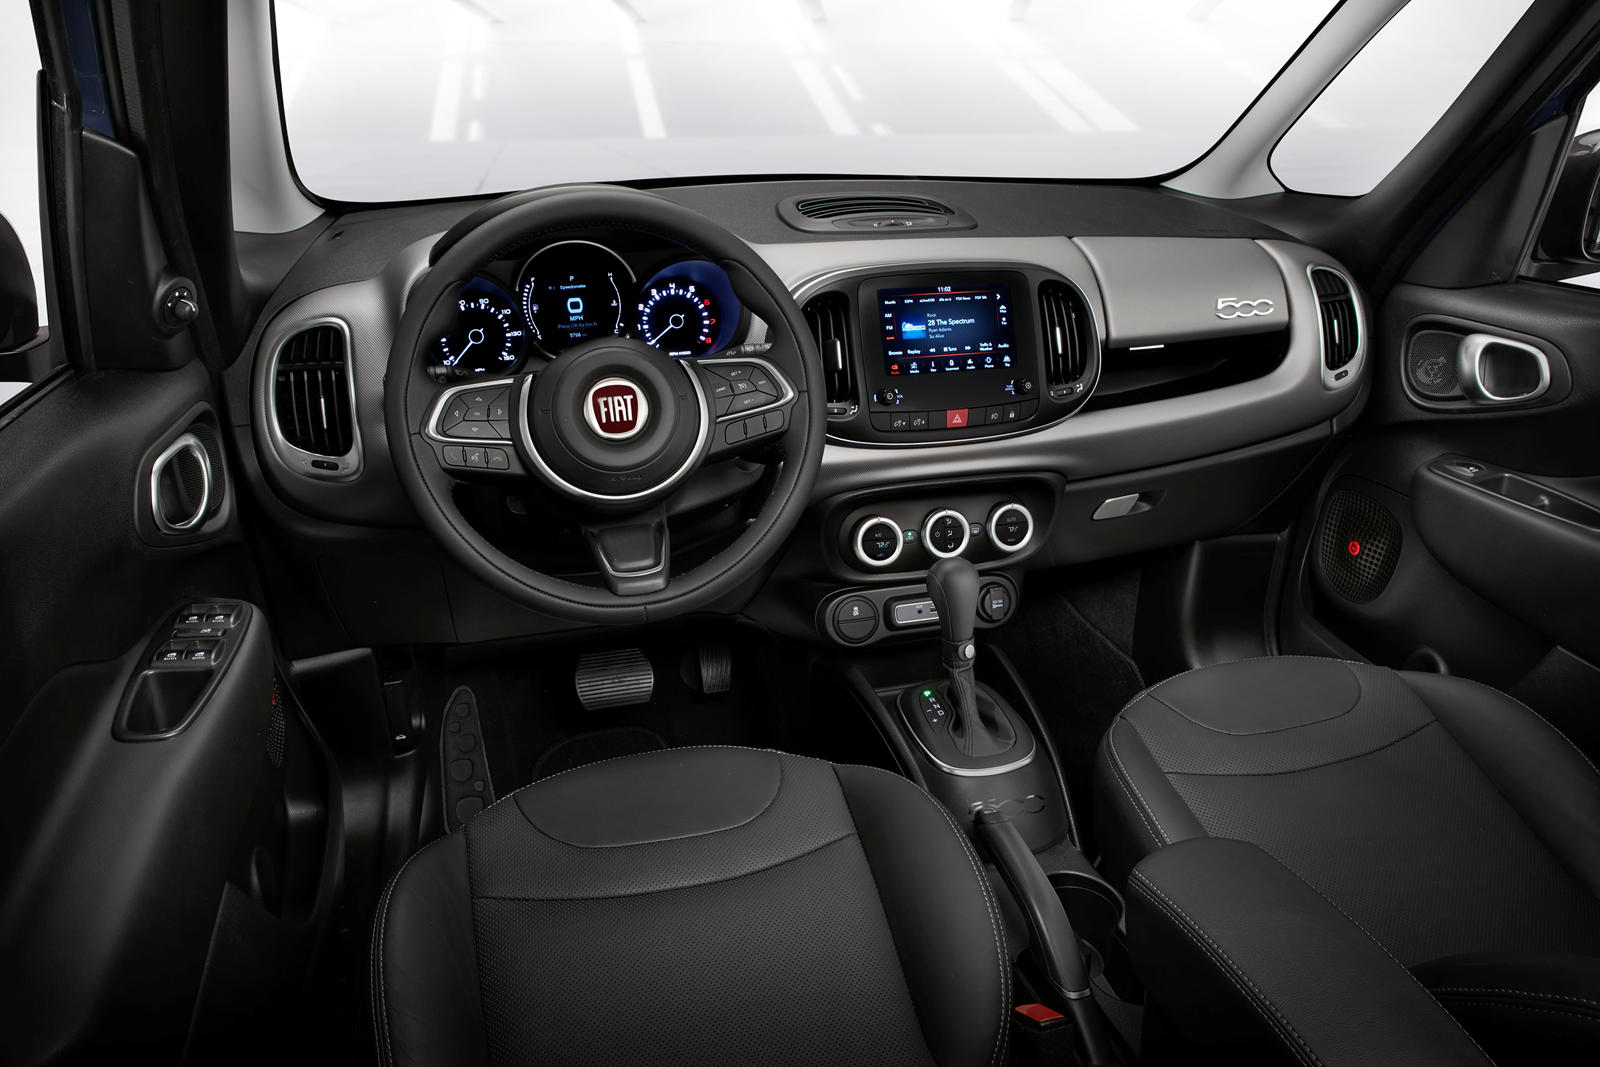 2020 Fiat 500L Interior Dimensions: Seating, Cargo Space & Trunk Size -  Photos | CarBuzz